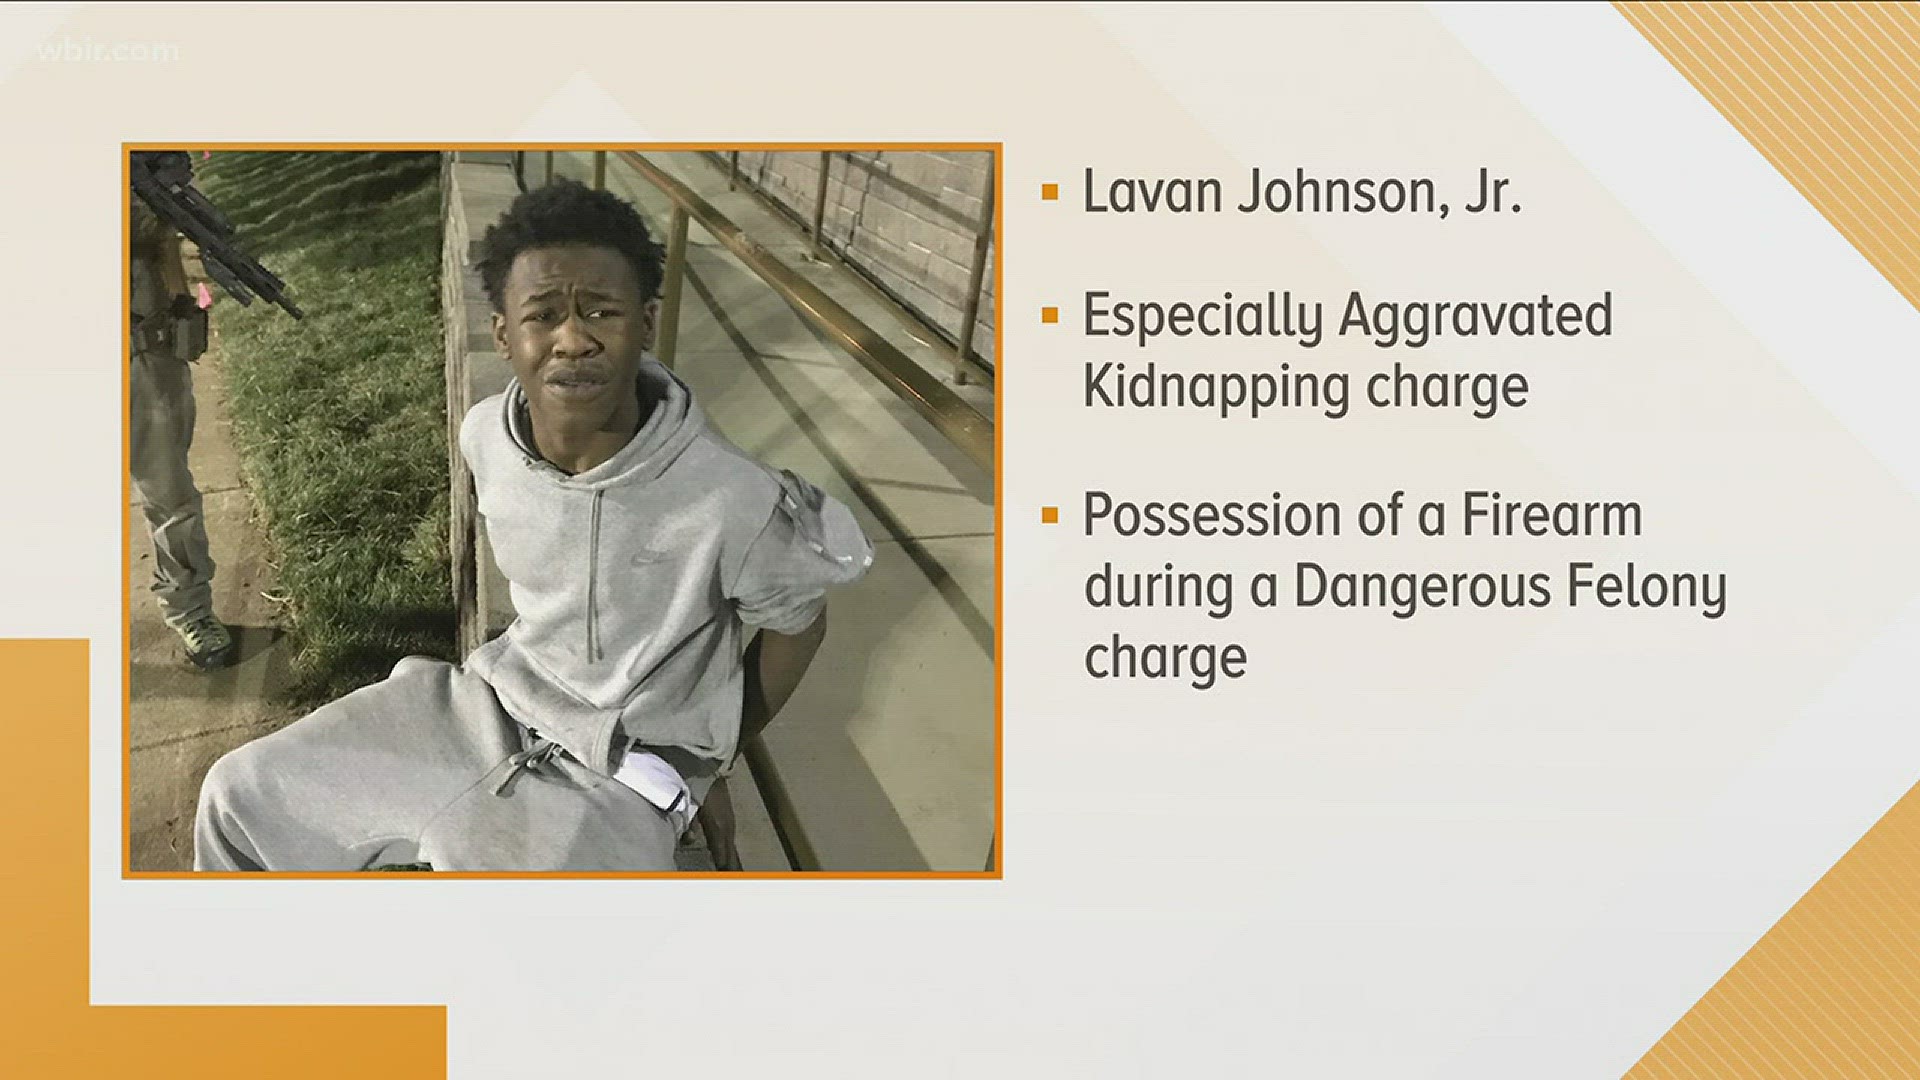 Lavan Johnson Jr. was wanted on charges of especially aggravated kidnapping and possession of a firearm during a dangerous felony.